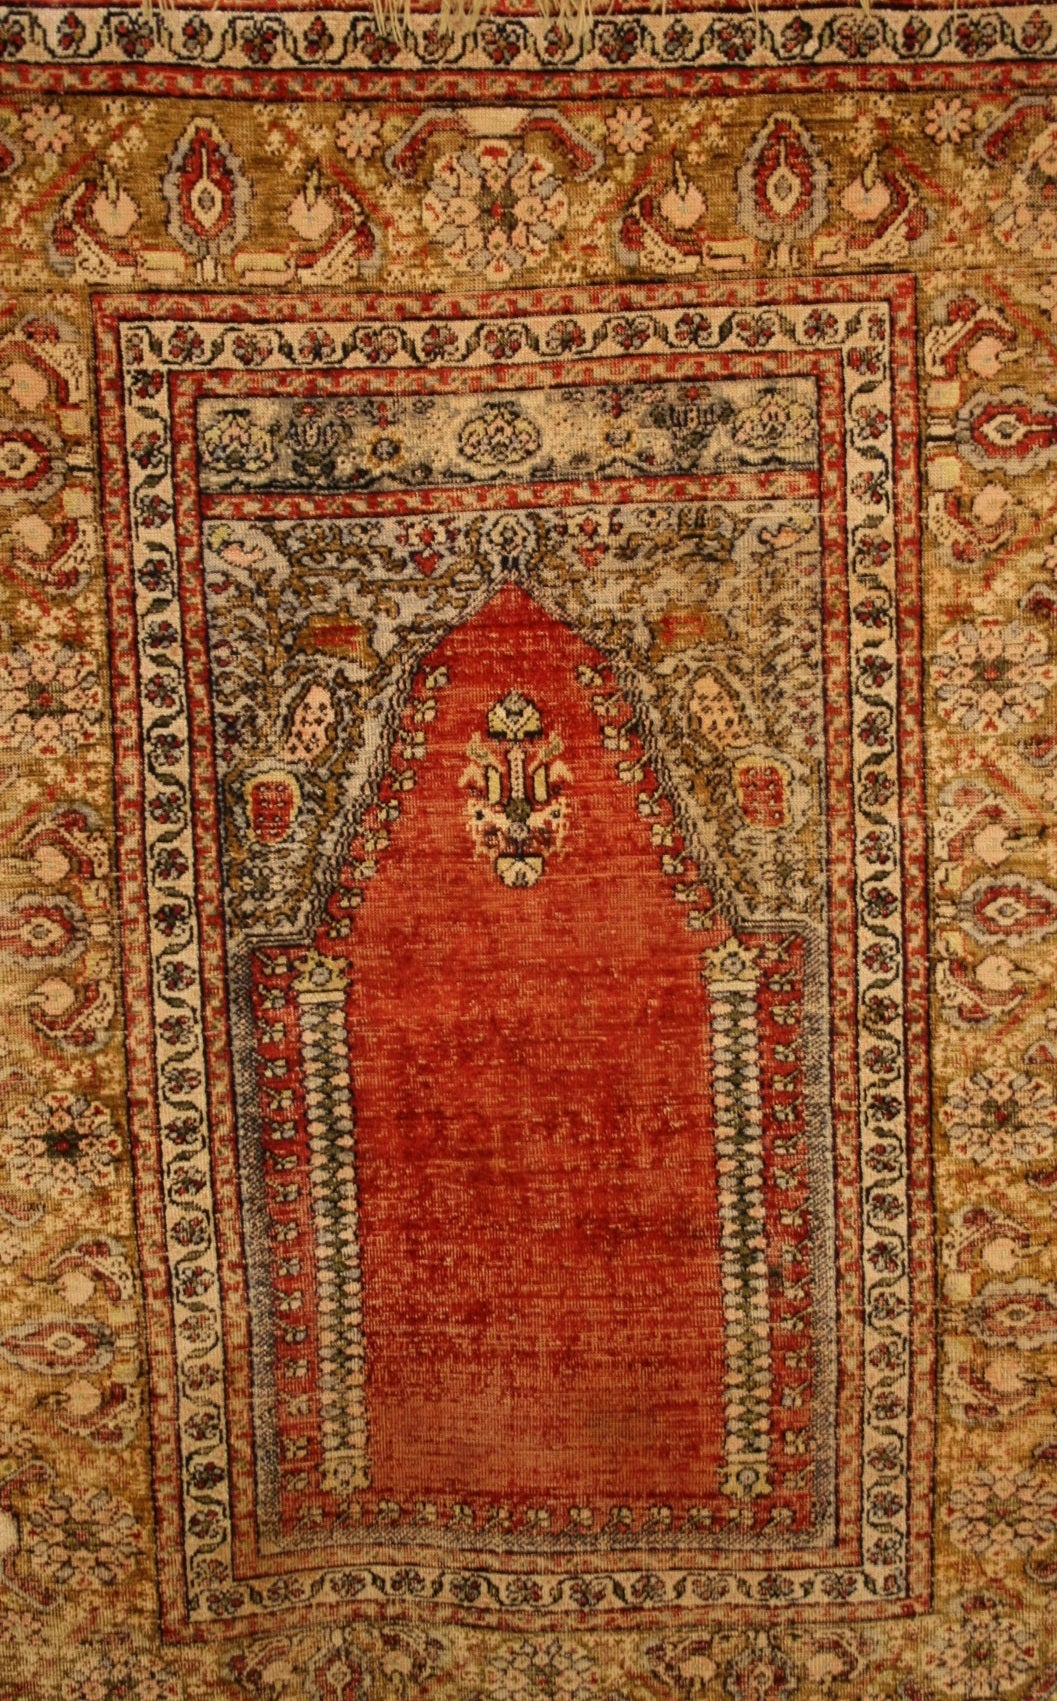 This is an antique Turkish silk prayer carpet. It was woven in the workshops of Kayseri in Central Anatolia. Tis piece has a classic design and color combination. The rich vegetal dyes used give this piece a very rich saturated depth. The border is